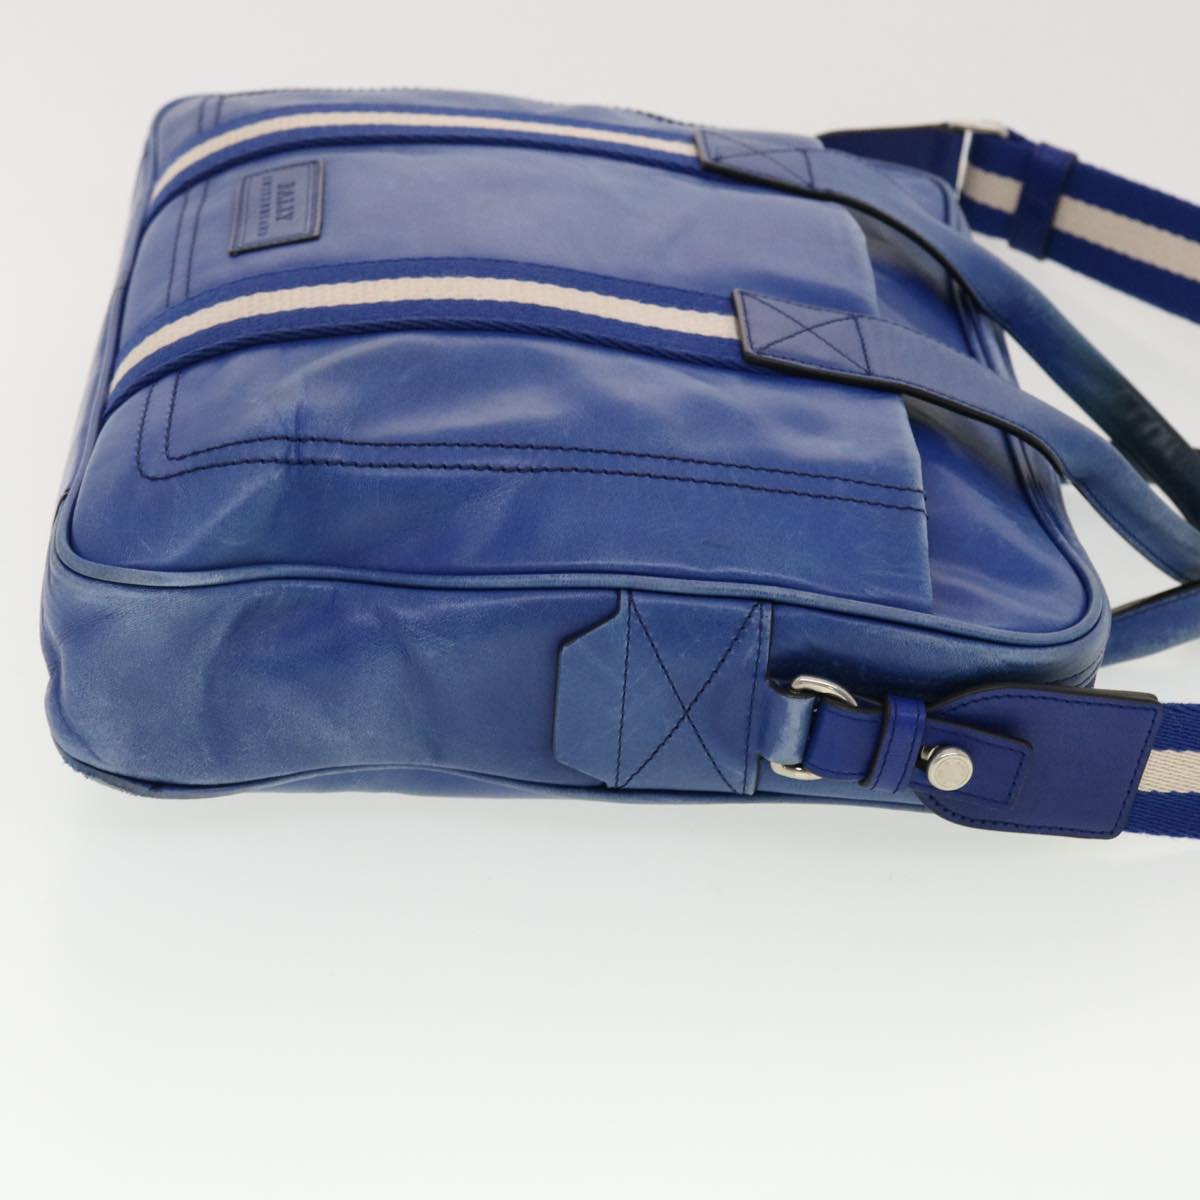 BALLY Hand Bag Leather 2way Blue Auth 39442